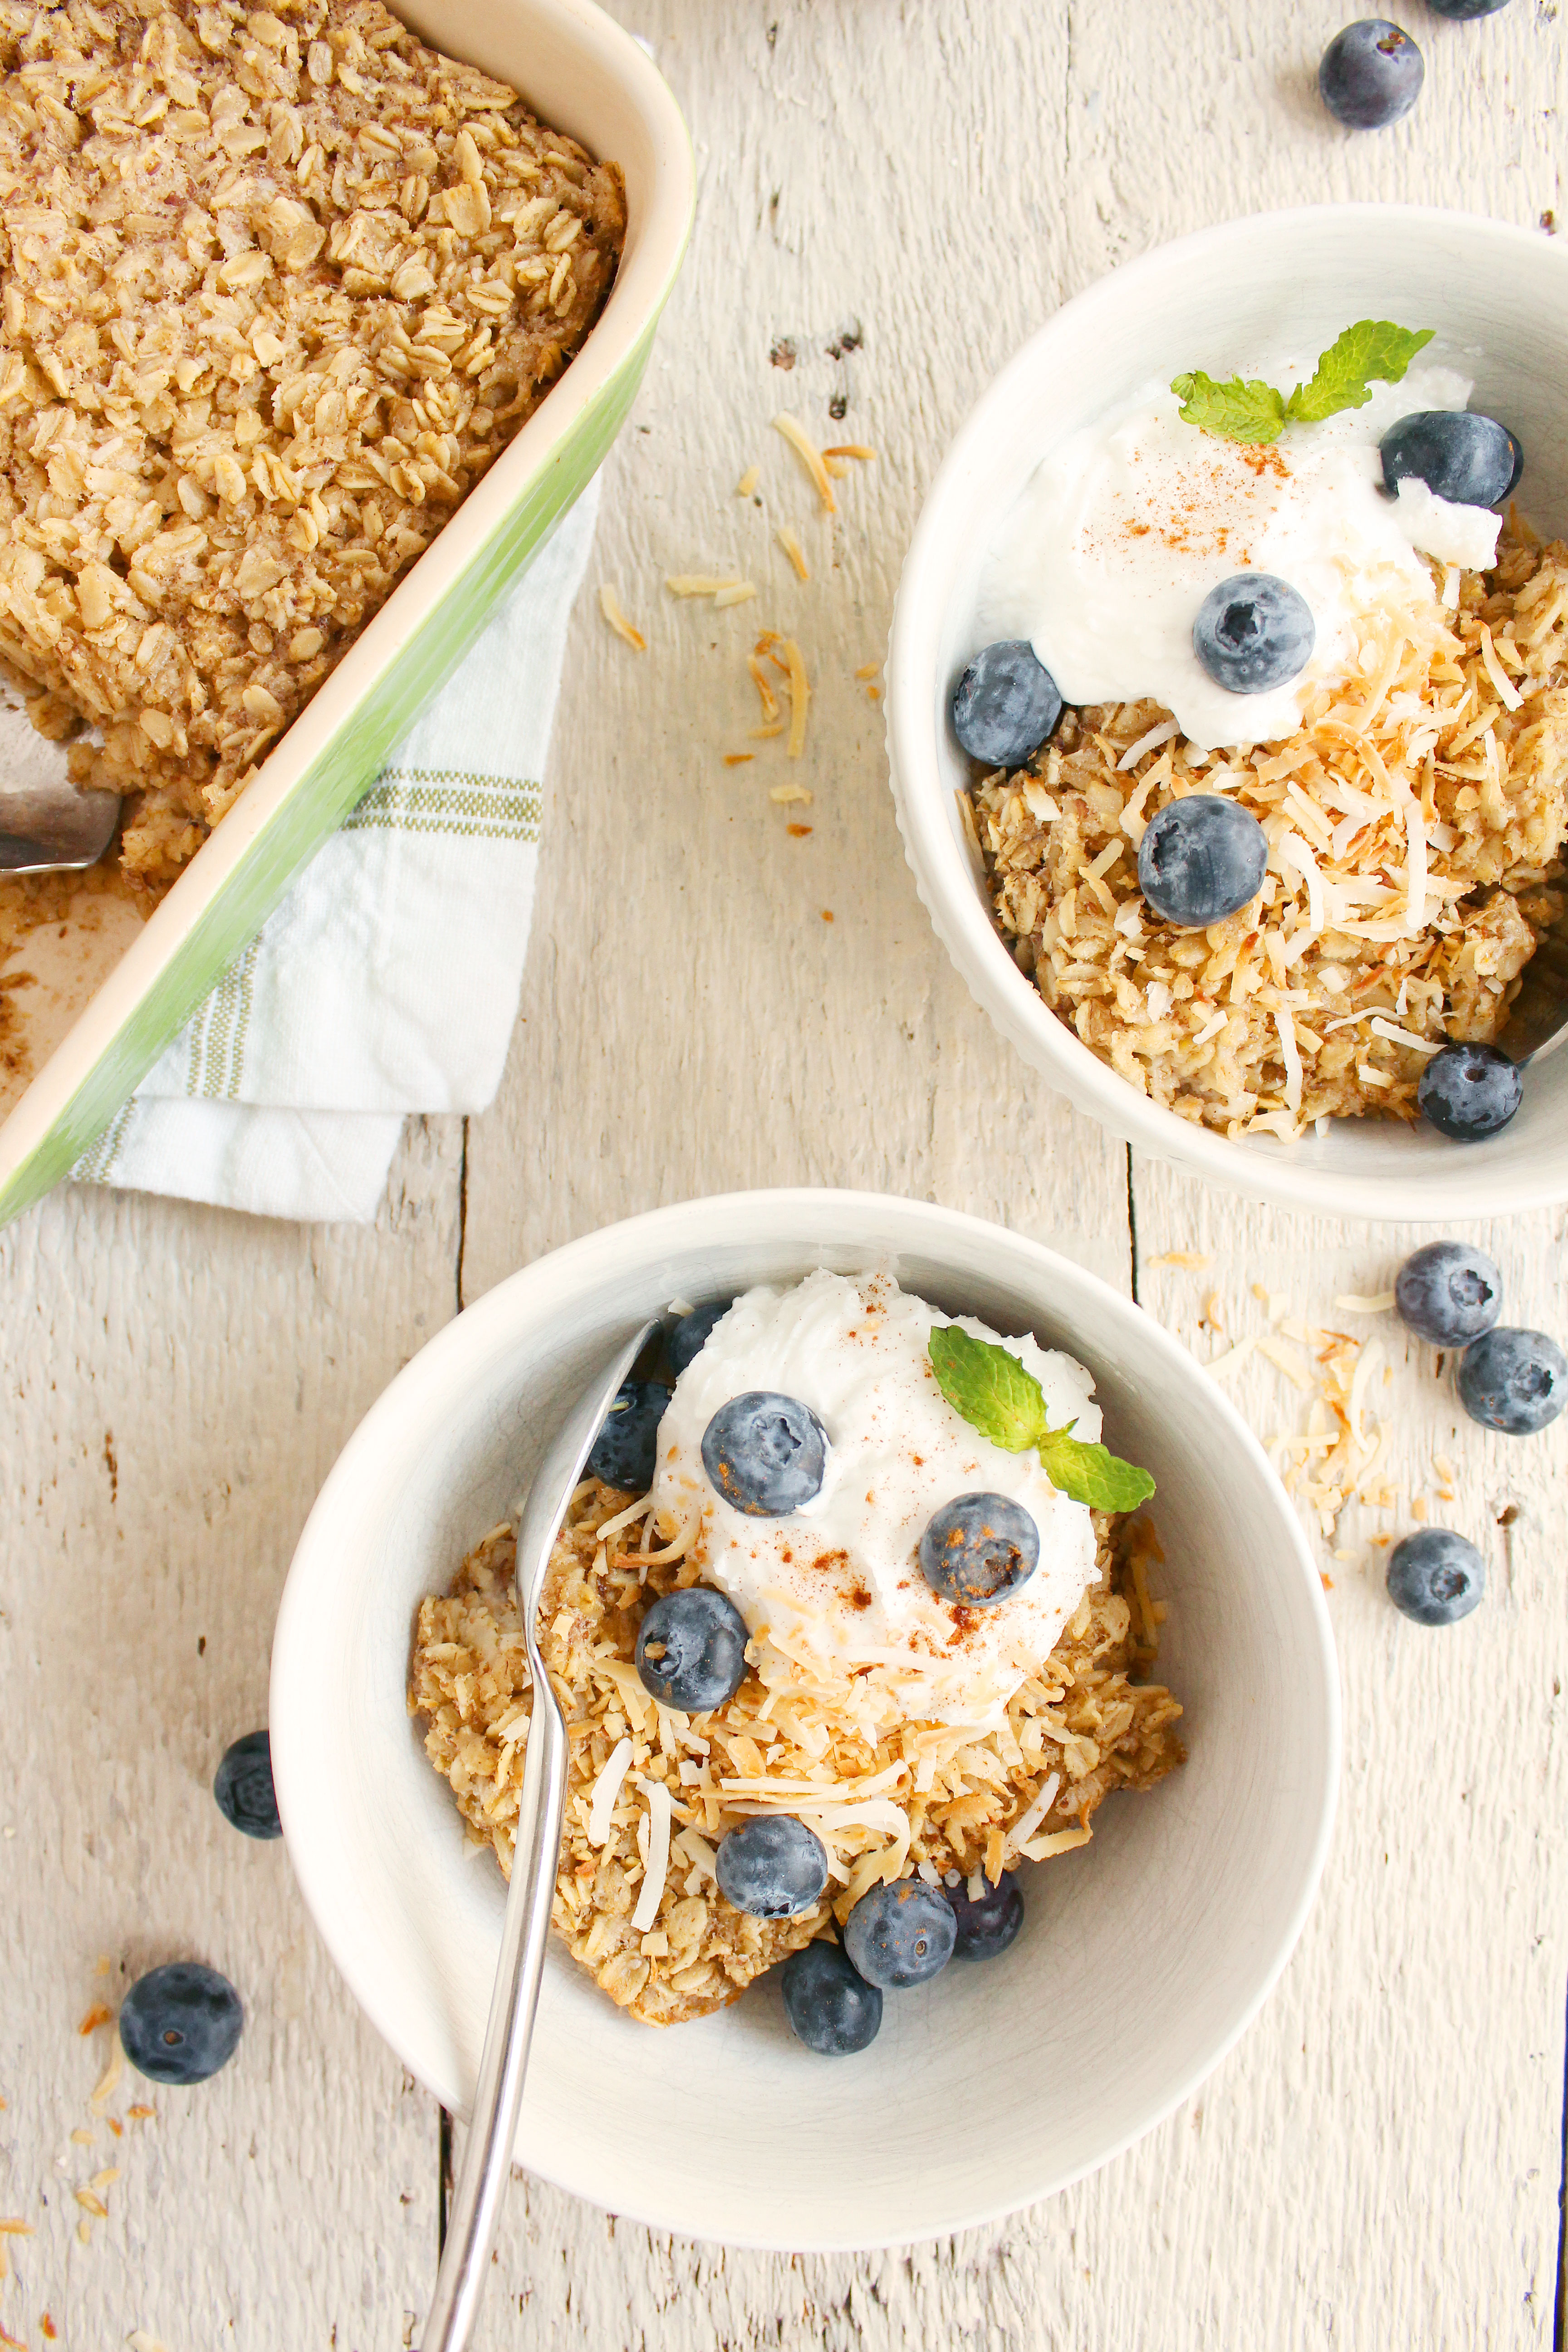 DELICIOUS Coconut Chai Baked Oatmeal! Your new breakfast go-to that's naturally sweetened, creamy + chewy, and SO YUM! #vegan #glutenfree #recipe | Peach and the Cobbler